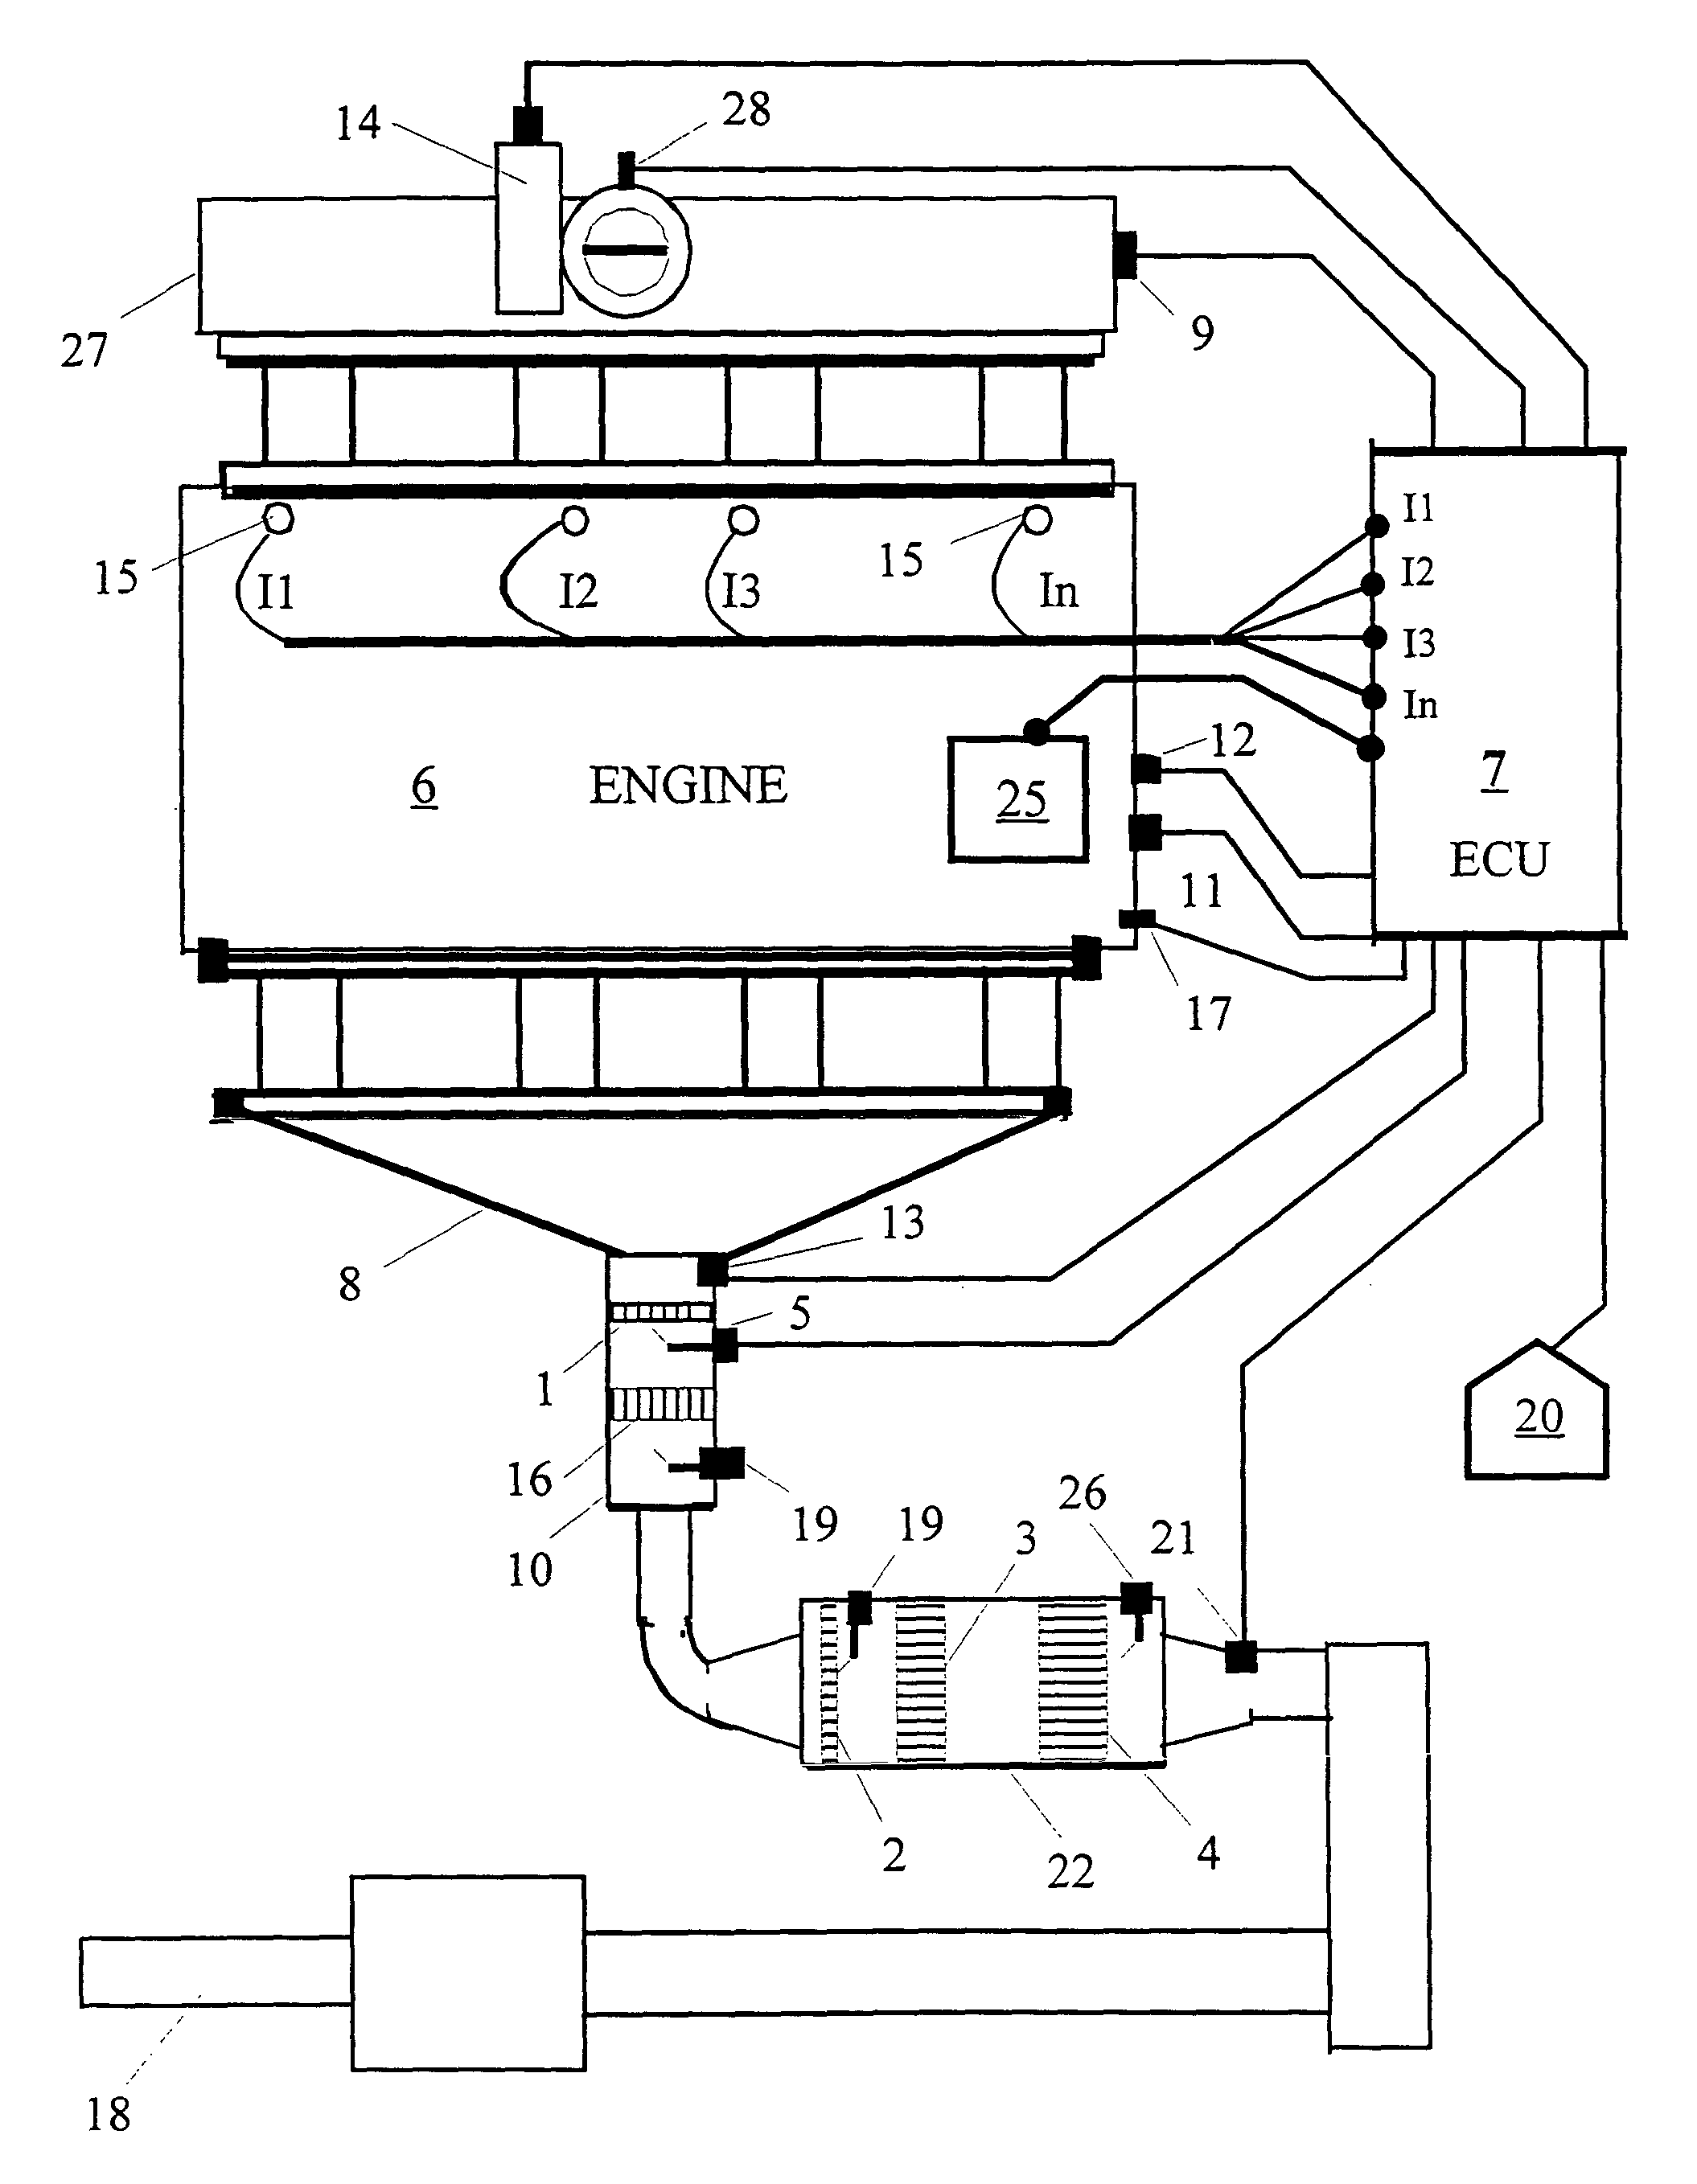 Control methods for improved catalytic converter efficiency and diagnosis